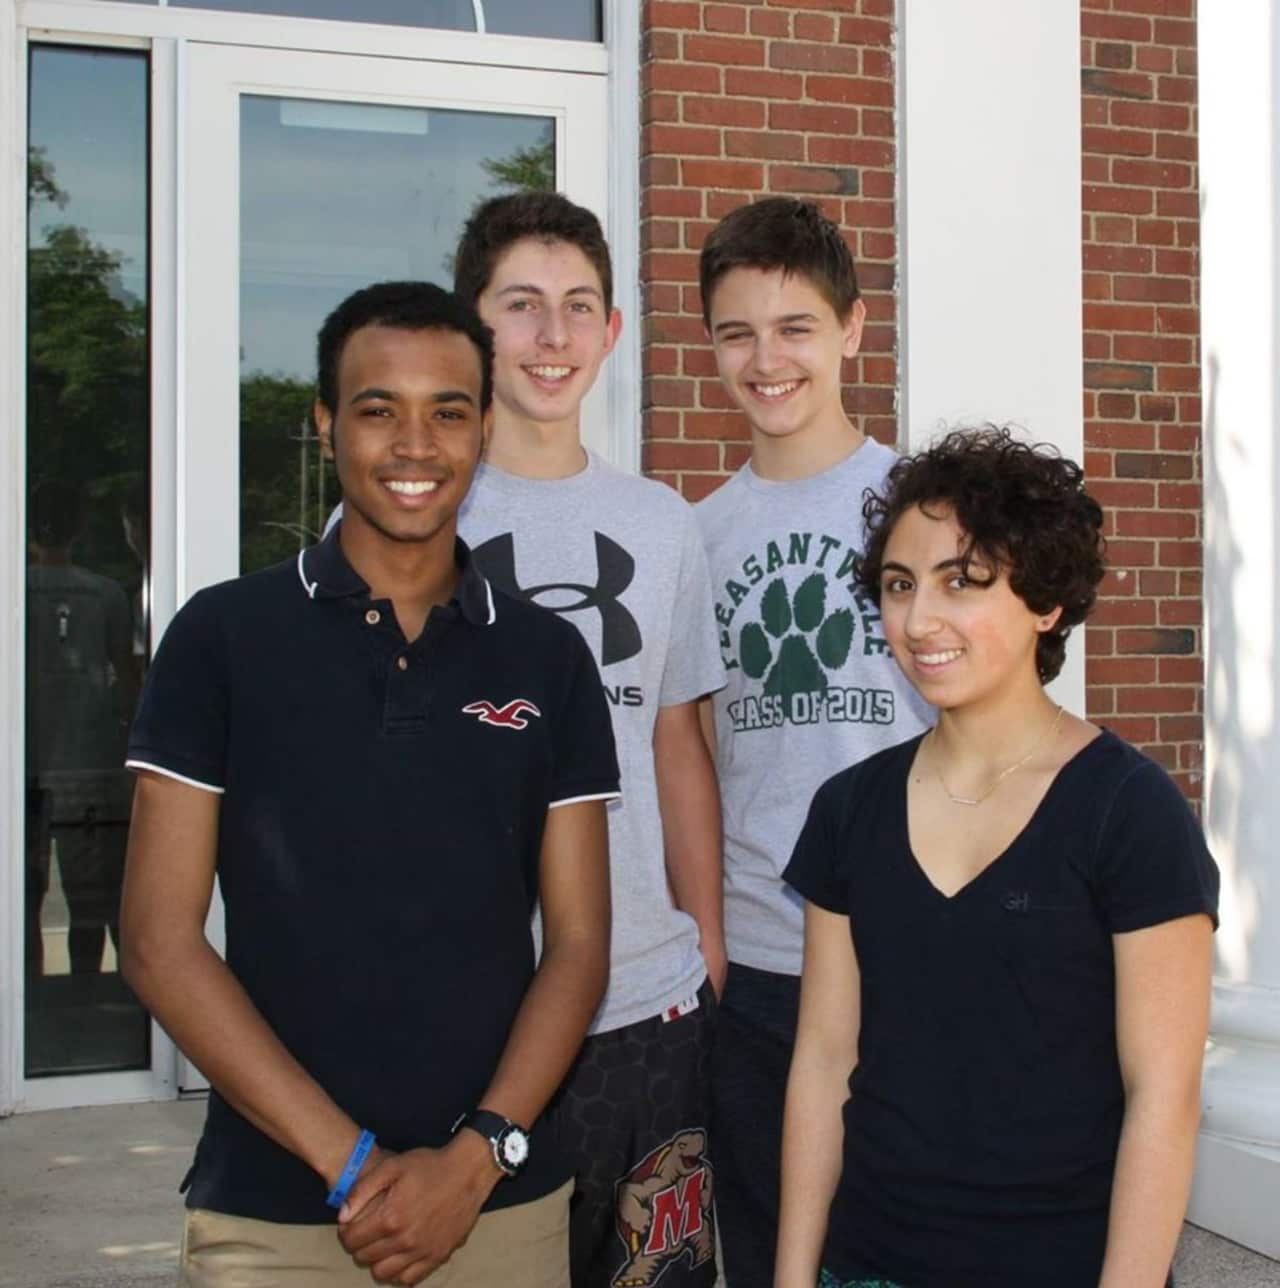 Pictured are the four members of Pleasantville High School's Speech and Debate Team who were inducted into the National Speech and Debate Honor Society.